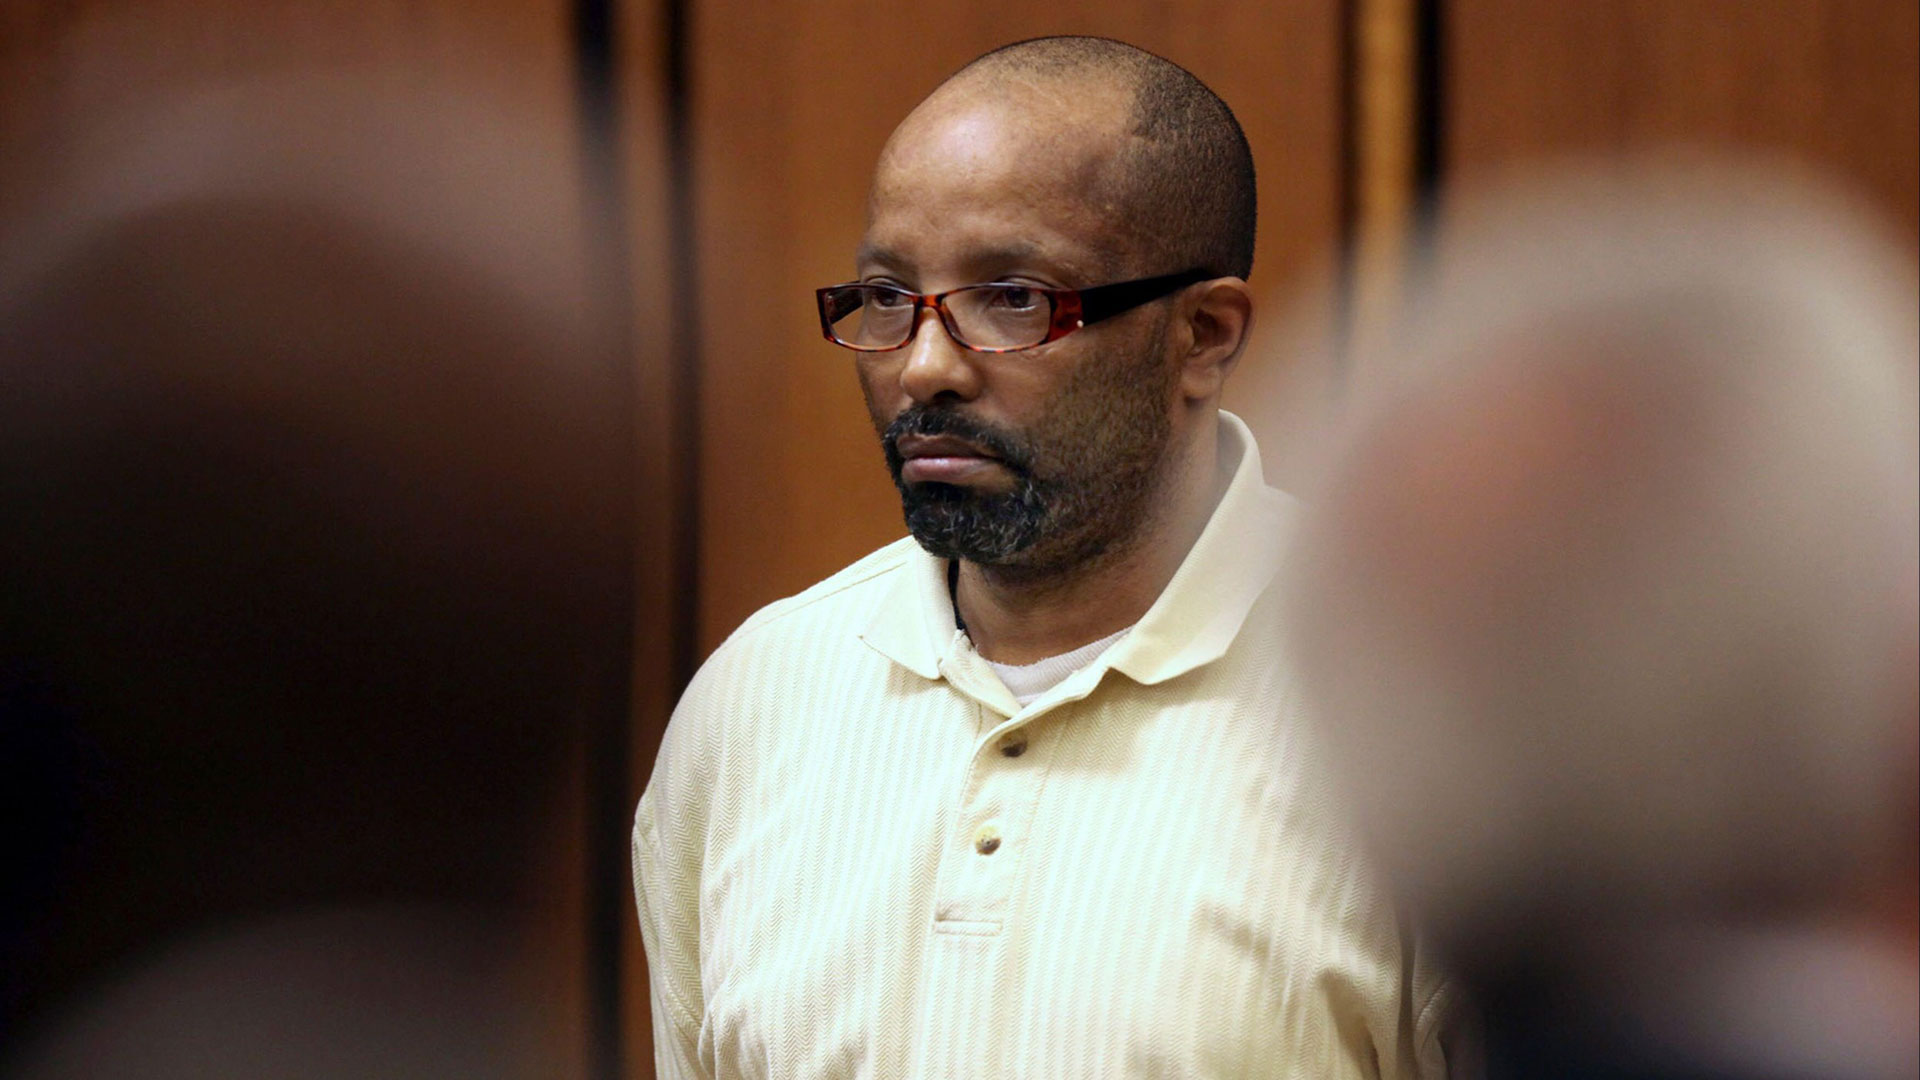 The Victims of Anthony Sowell, the Cleveland Strangler